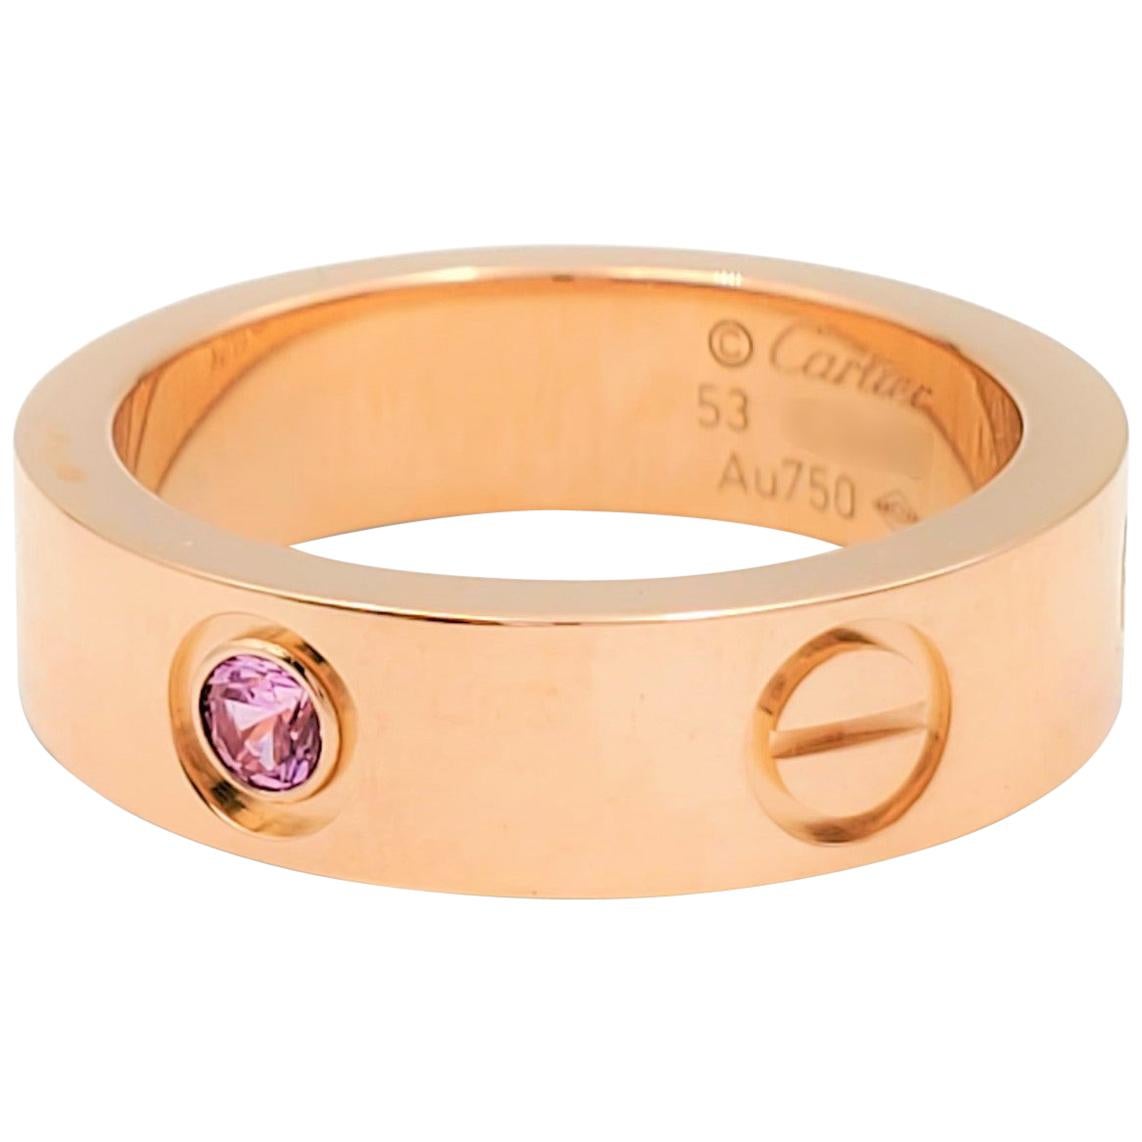 Cartier 'Love' Rose Gold and Pink Sapphire Ring